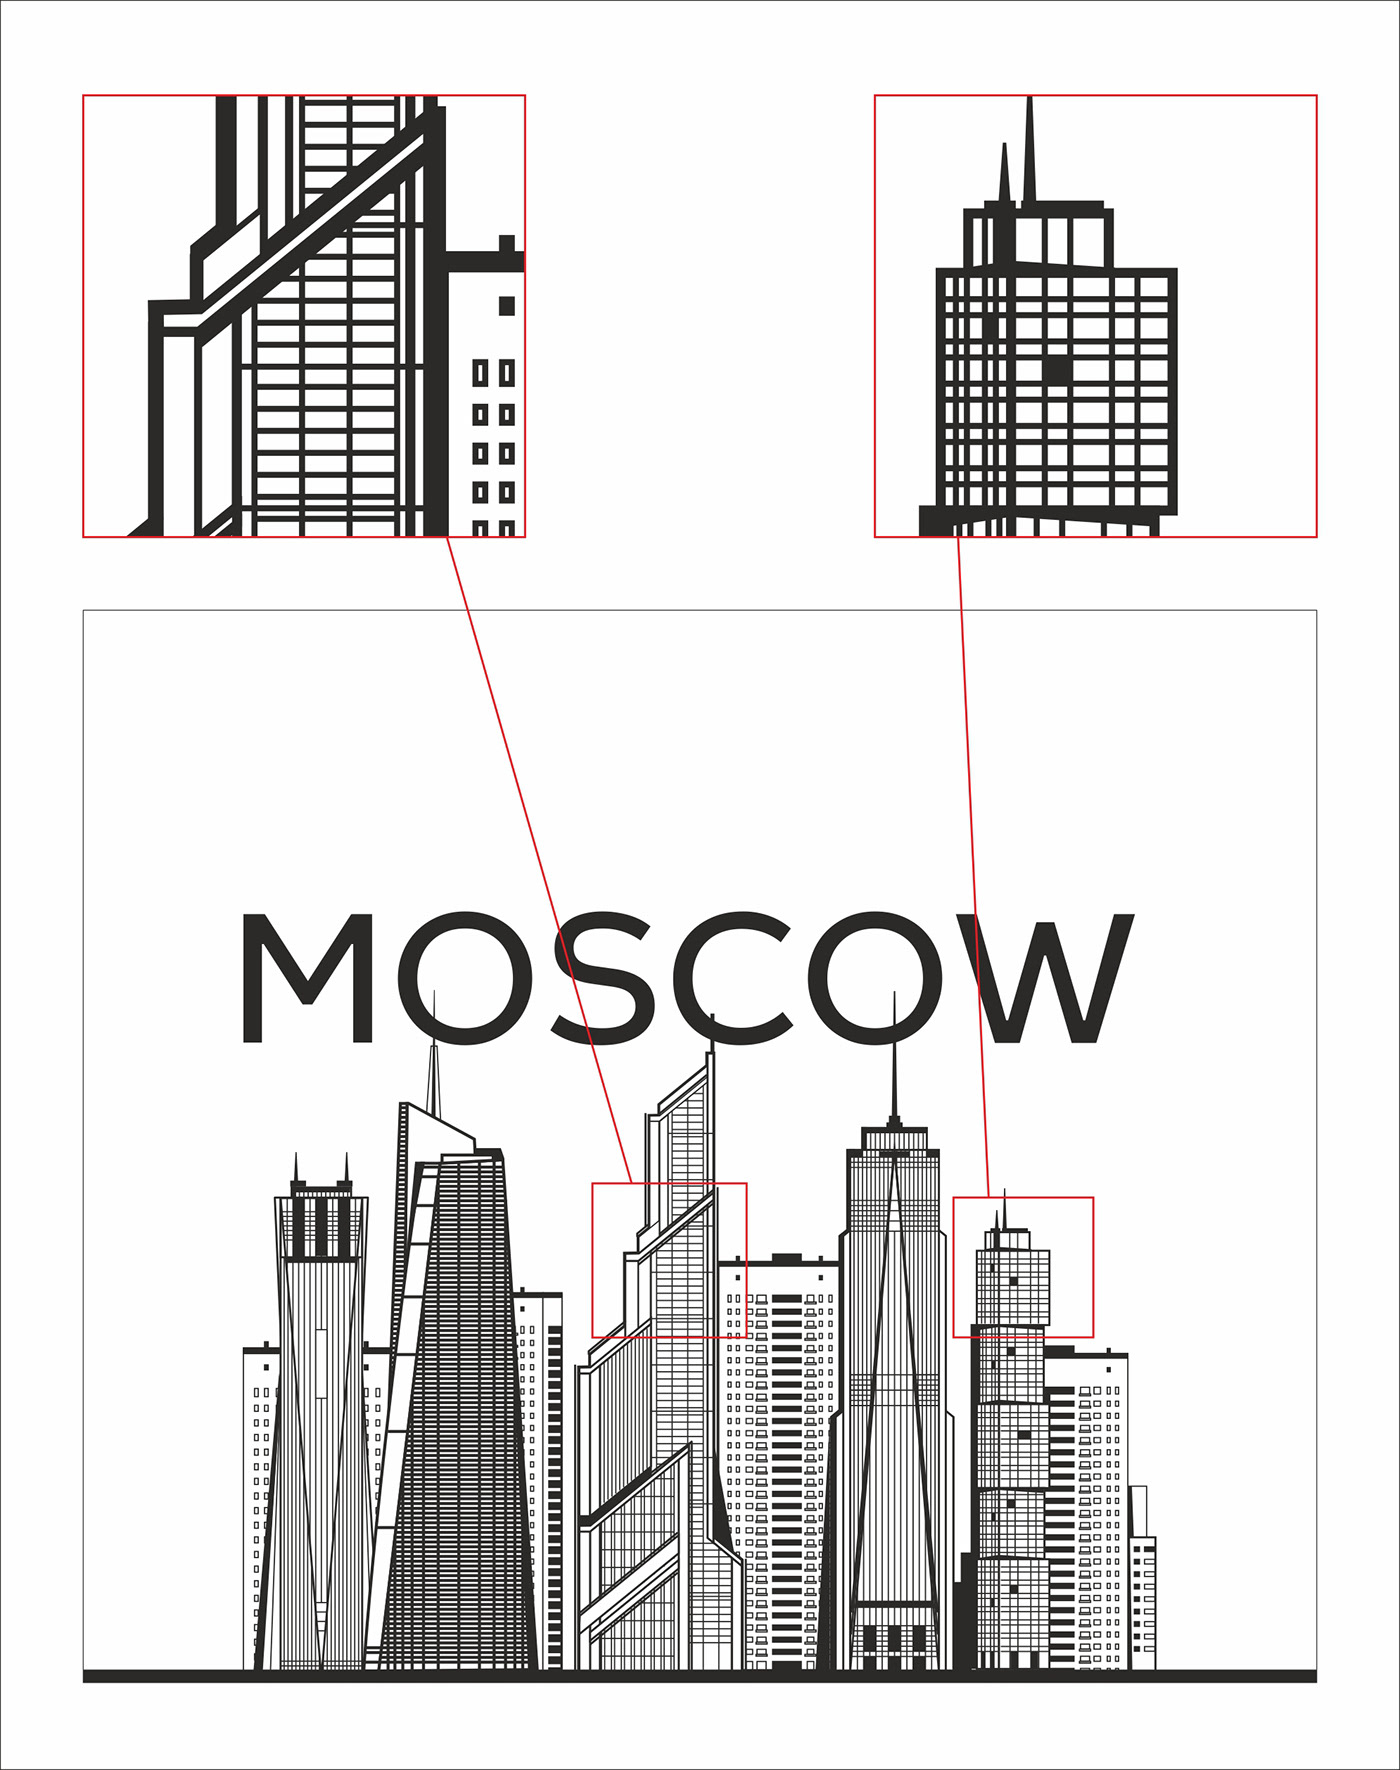 Moscow skysraper poster city black and white skyscrapers city poster lines